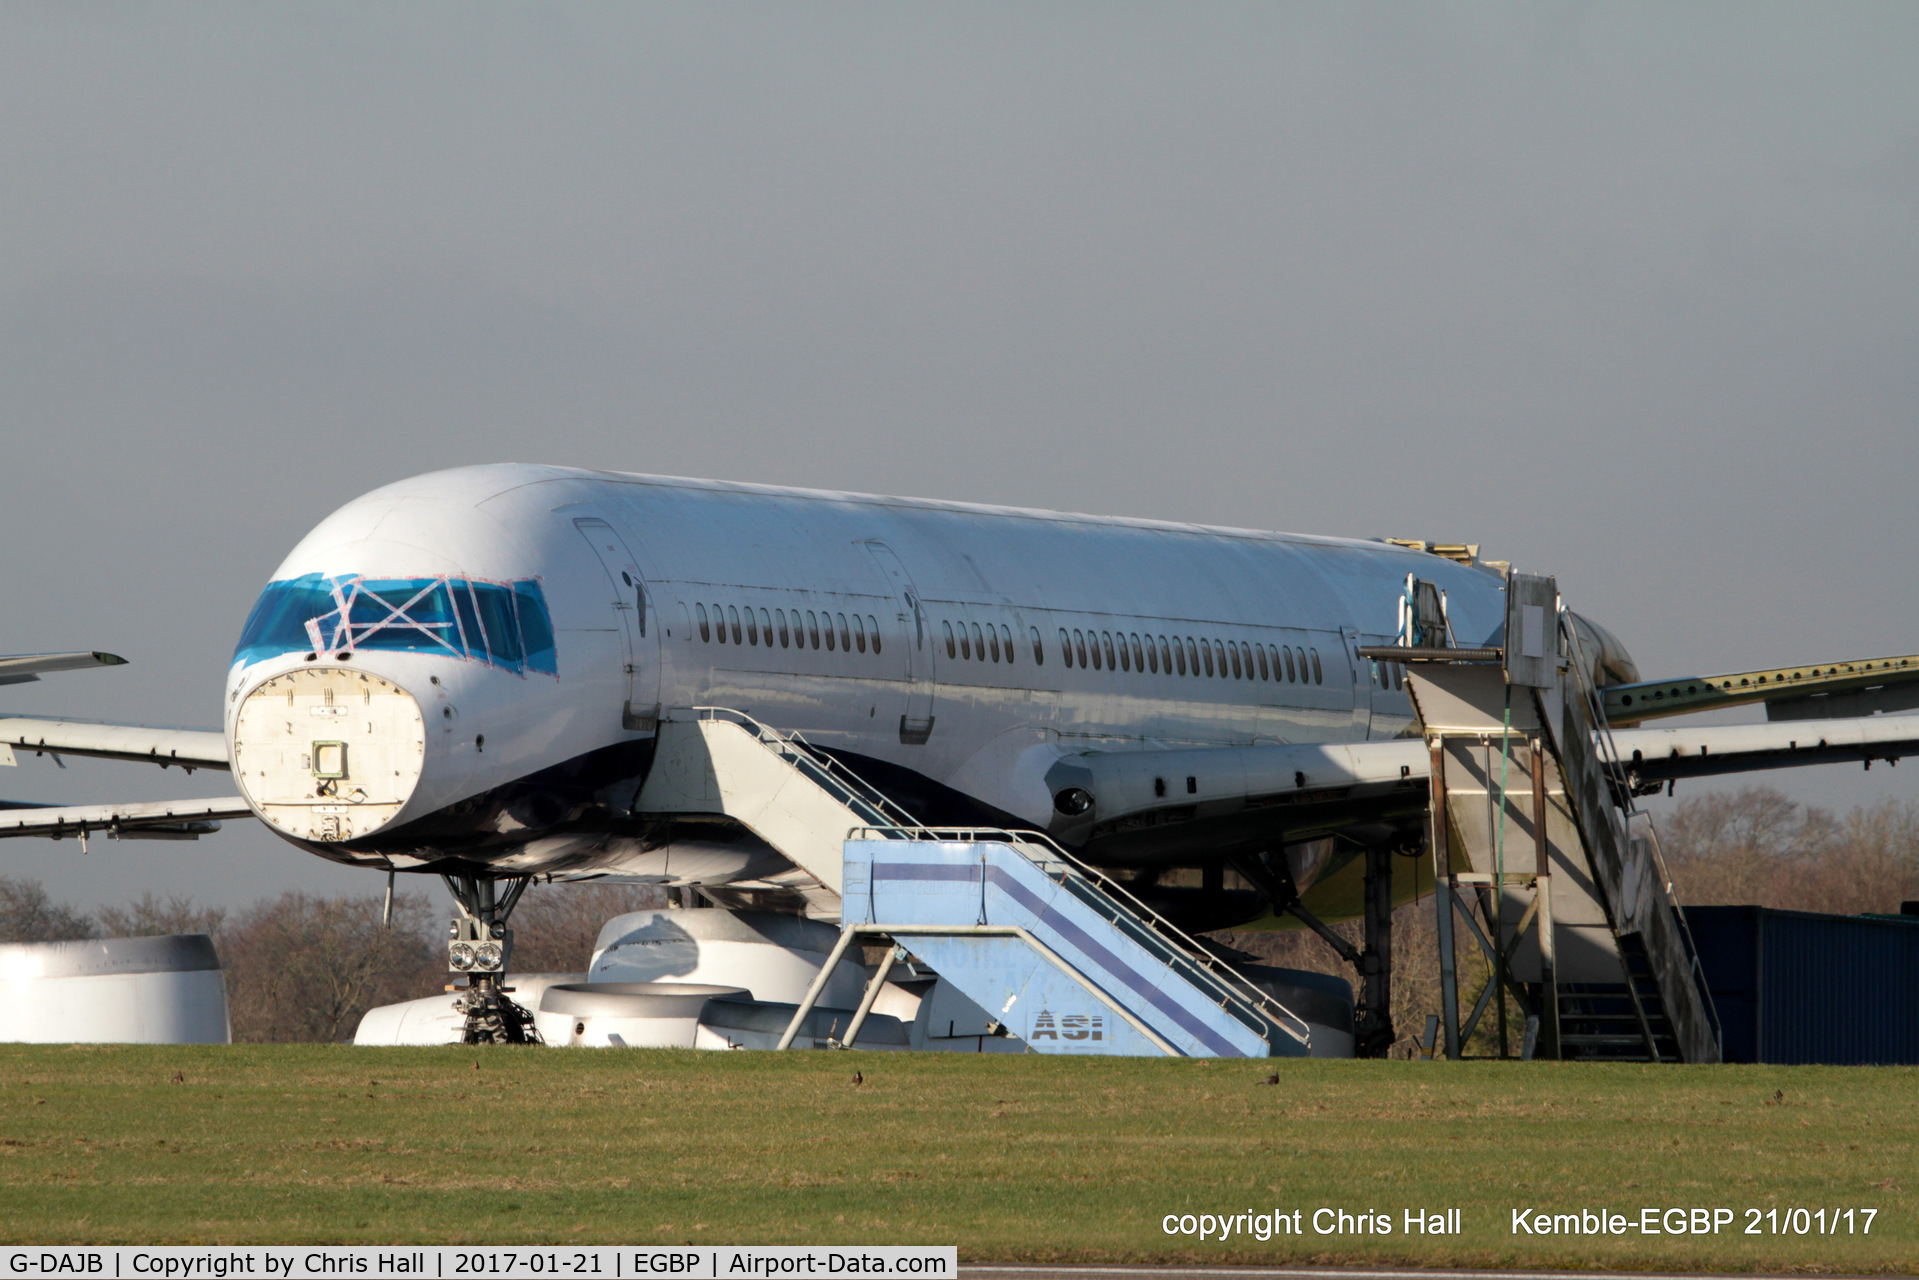 G-DAJB, 1987 Boeing 757-2T7 C/N 23770, in the scrapping area at Kemble